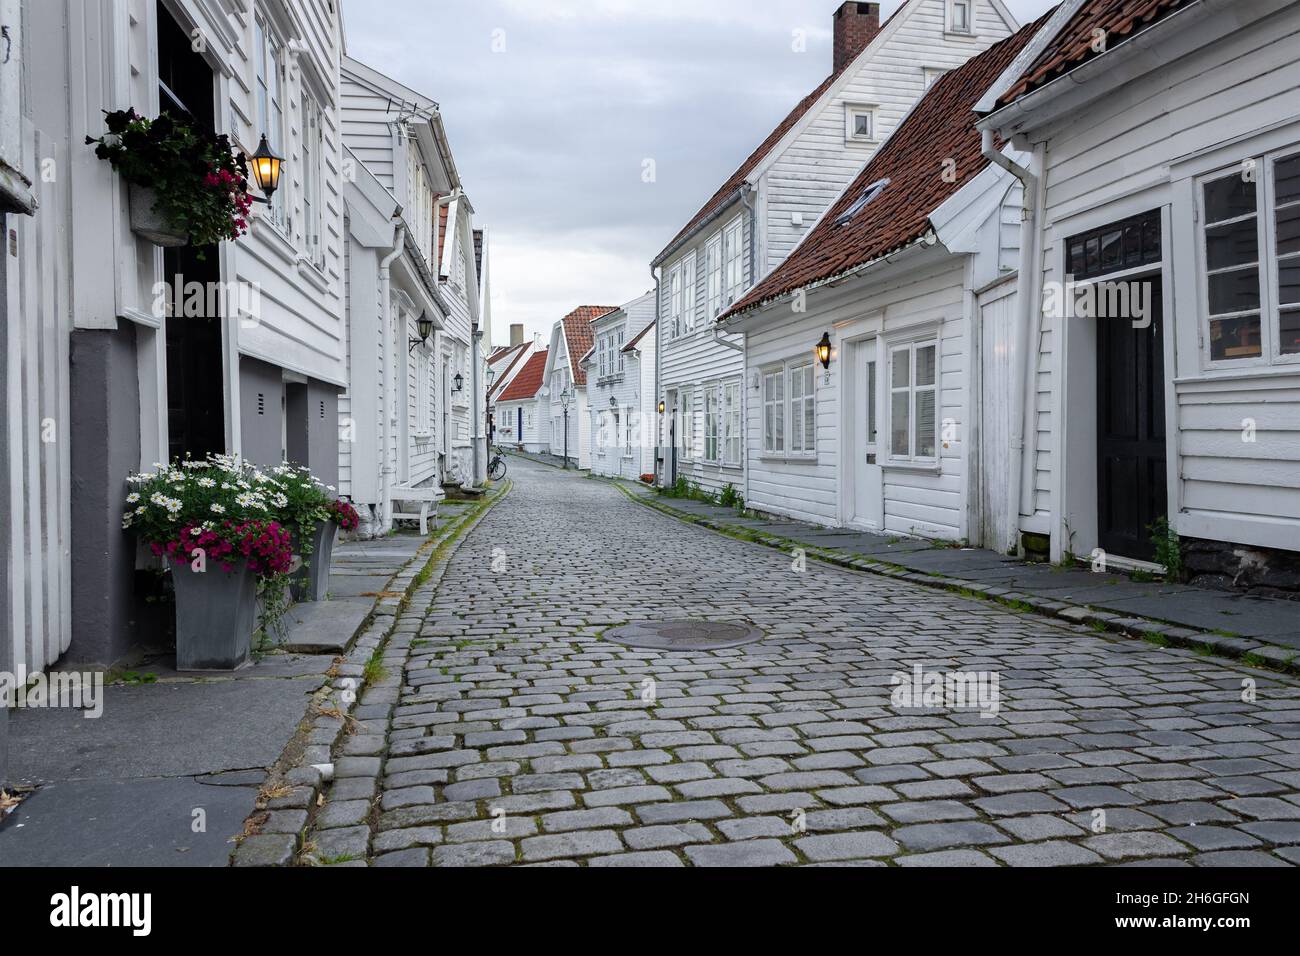 Stavanger, Norway: Ovre Strandgate, Old Town (Gamle); cobbled streets and restored wooden buildings. Stock Photo